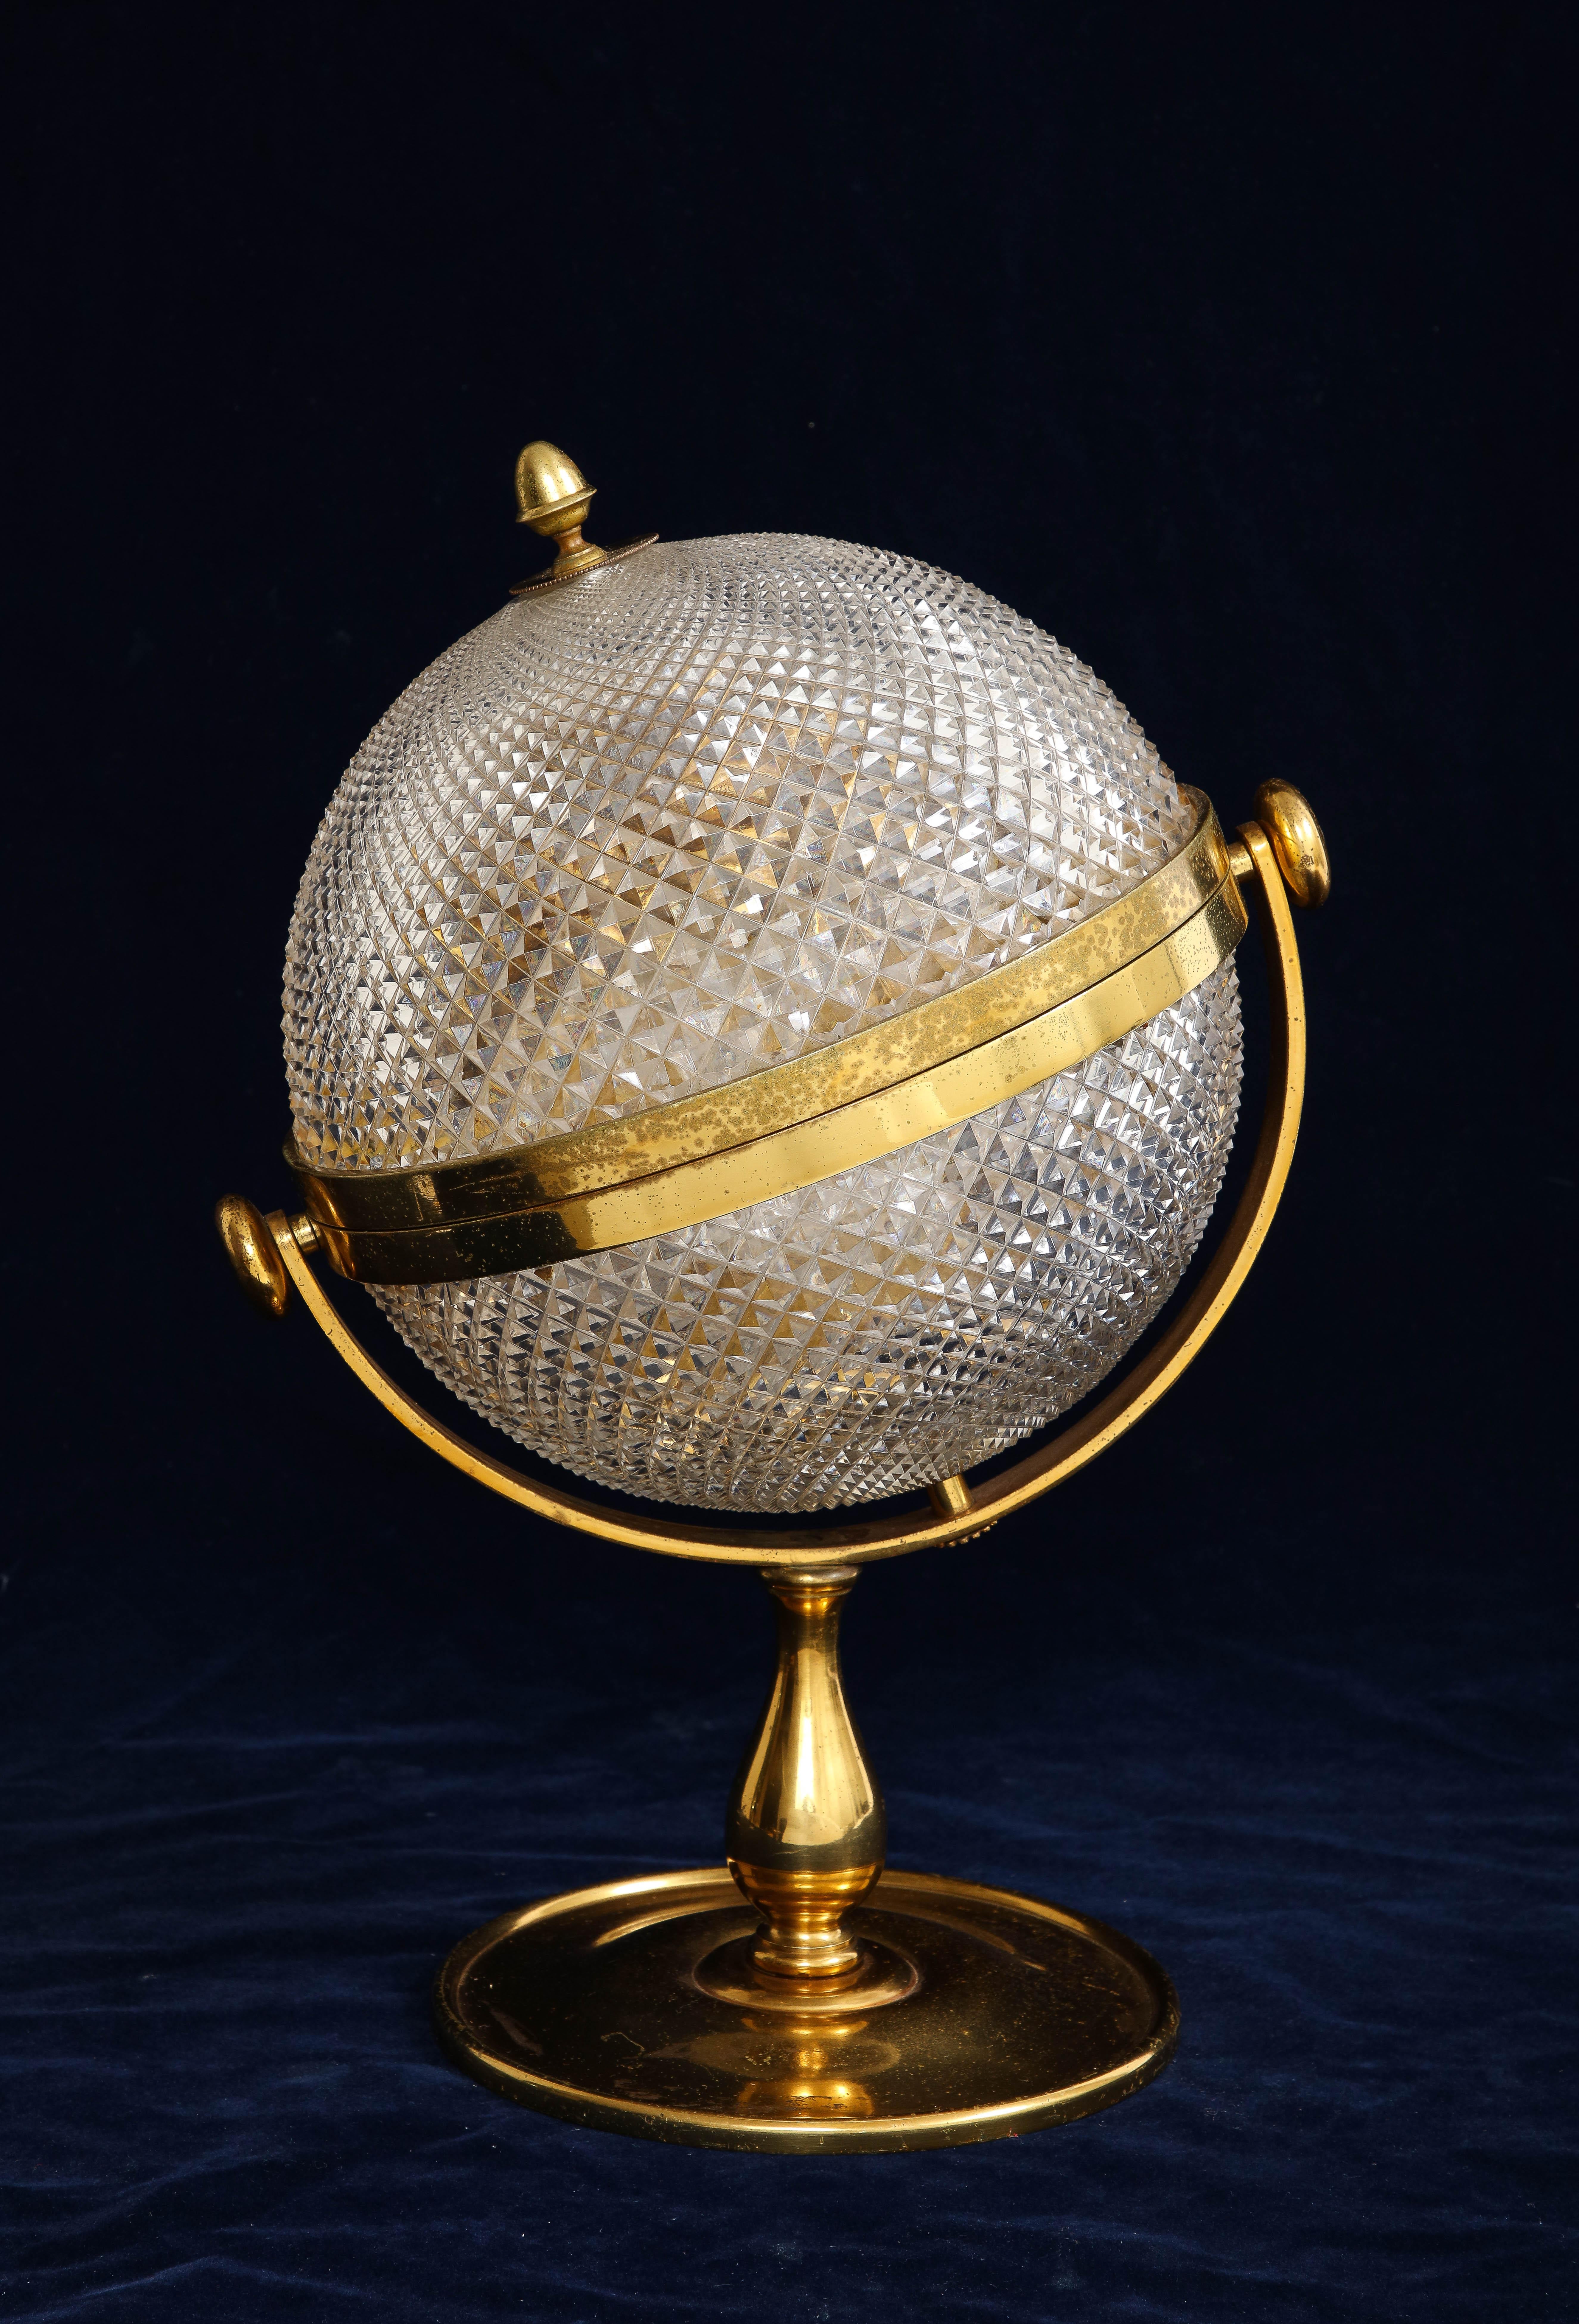 An Unusual 19th century French Ormolu Mounted Globe Style Tantalus liquor set. The round globe top which rests on an elongated ormolu base is not common to find. The crystal top is mounted in an ormolu case and consists of three hand-cut crystal